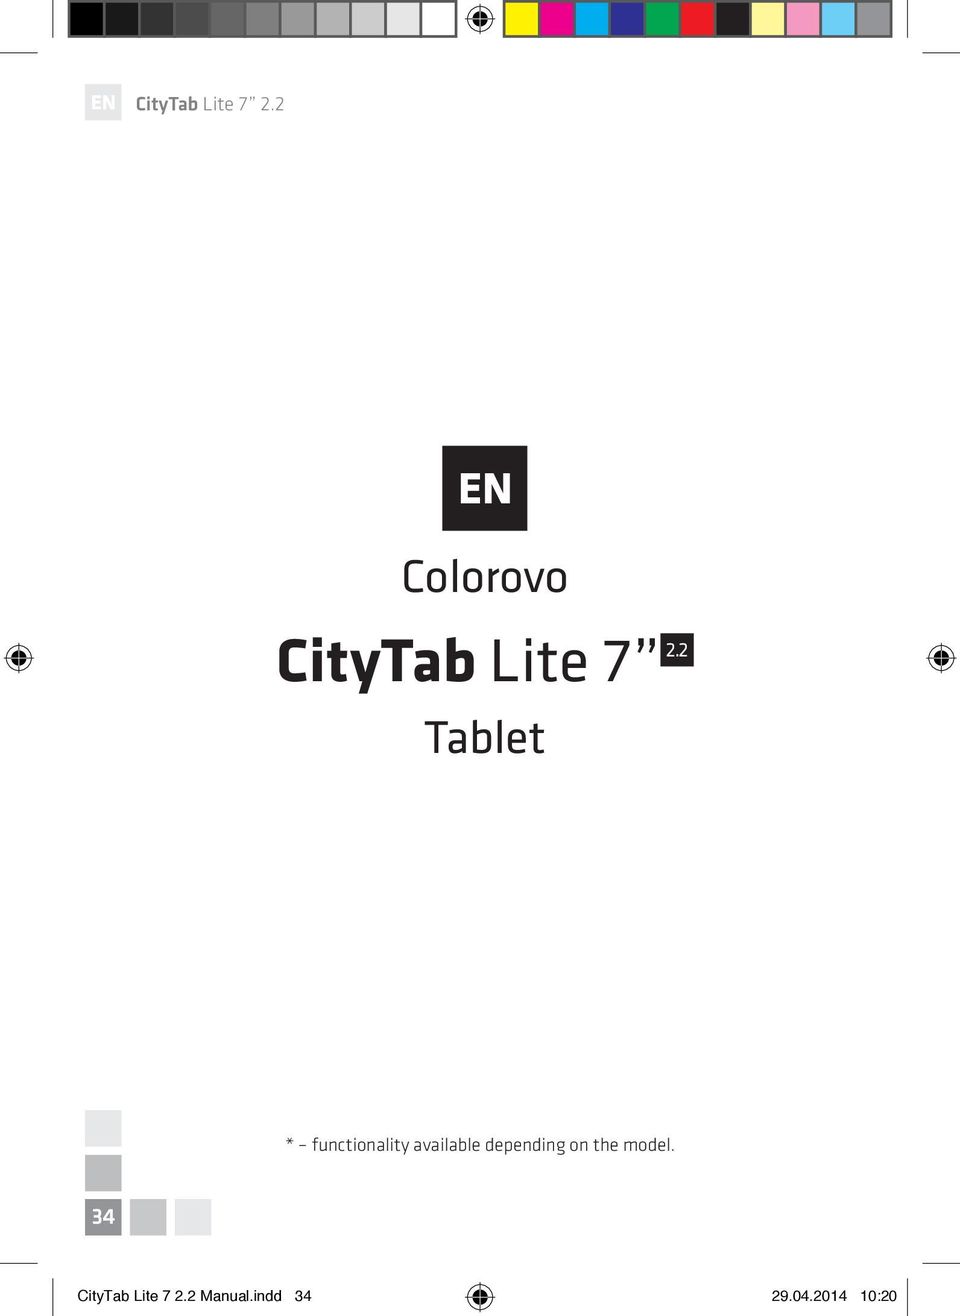 CityTab Lite Colorovo. Tablet. * functionality available depending on the  model. CityTab Lite Manual.indd - PDF Ingyenes letöltés